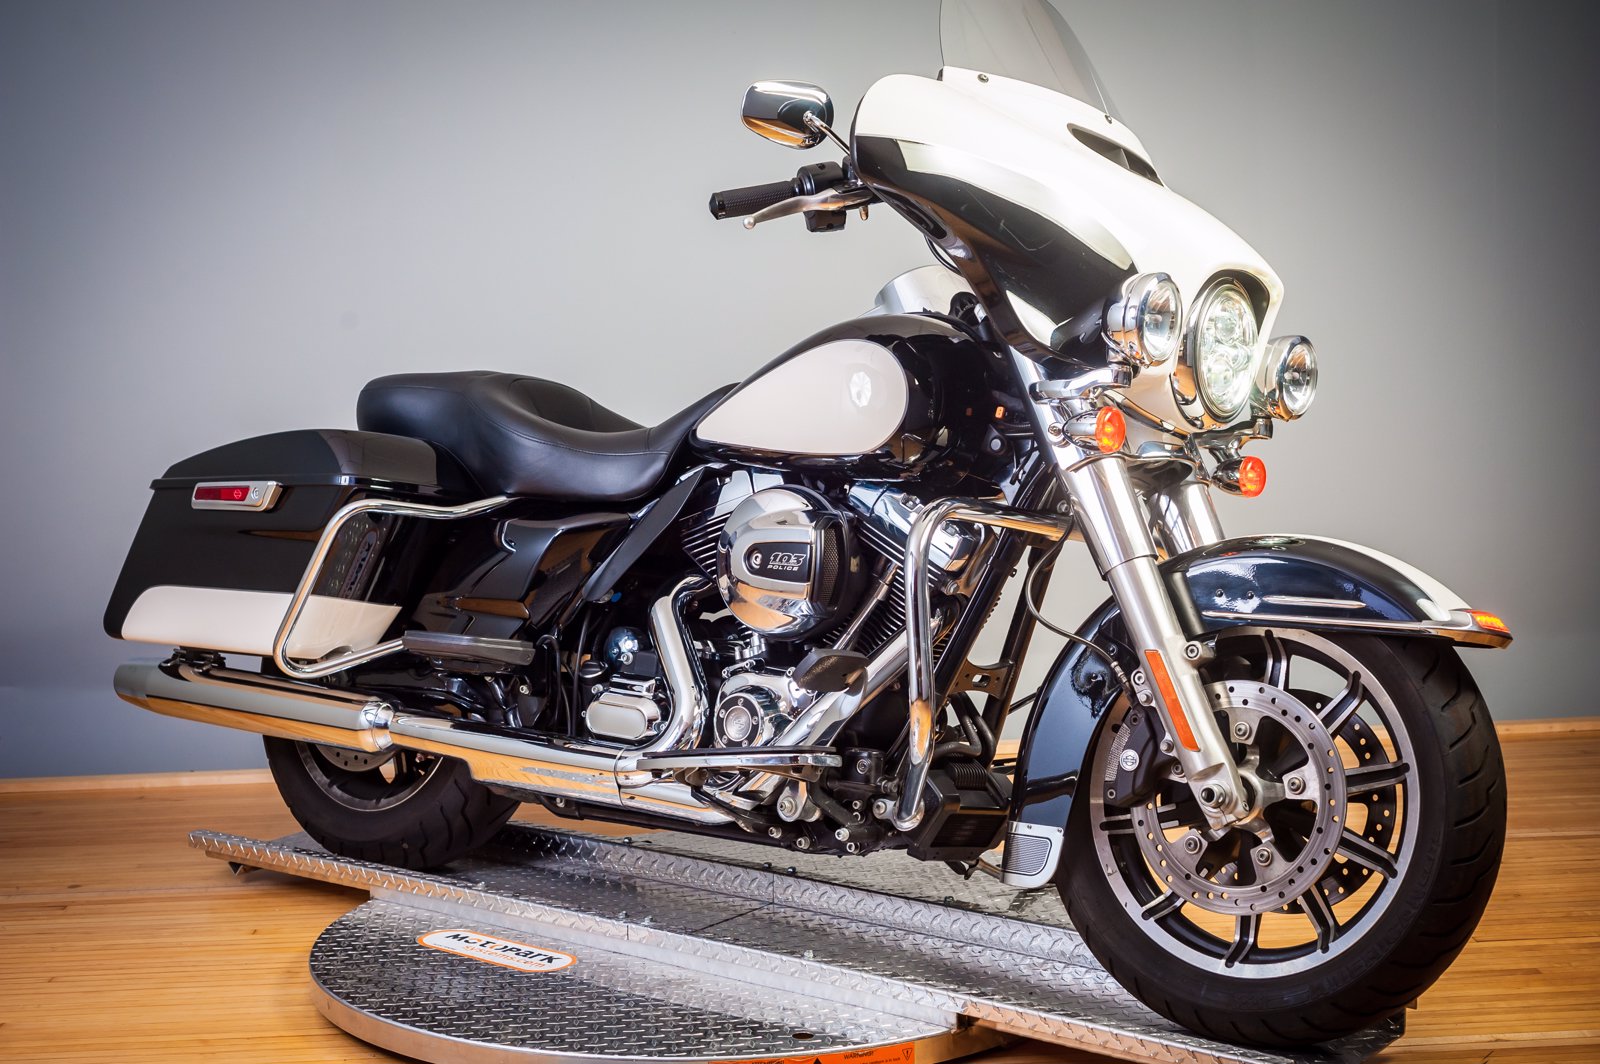 Pre-Owned 2015 Harley-Davidson Electra Glide Police FLHTP Touring in